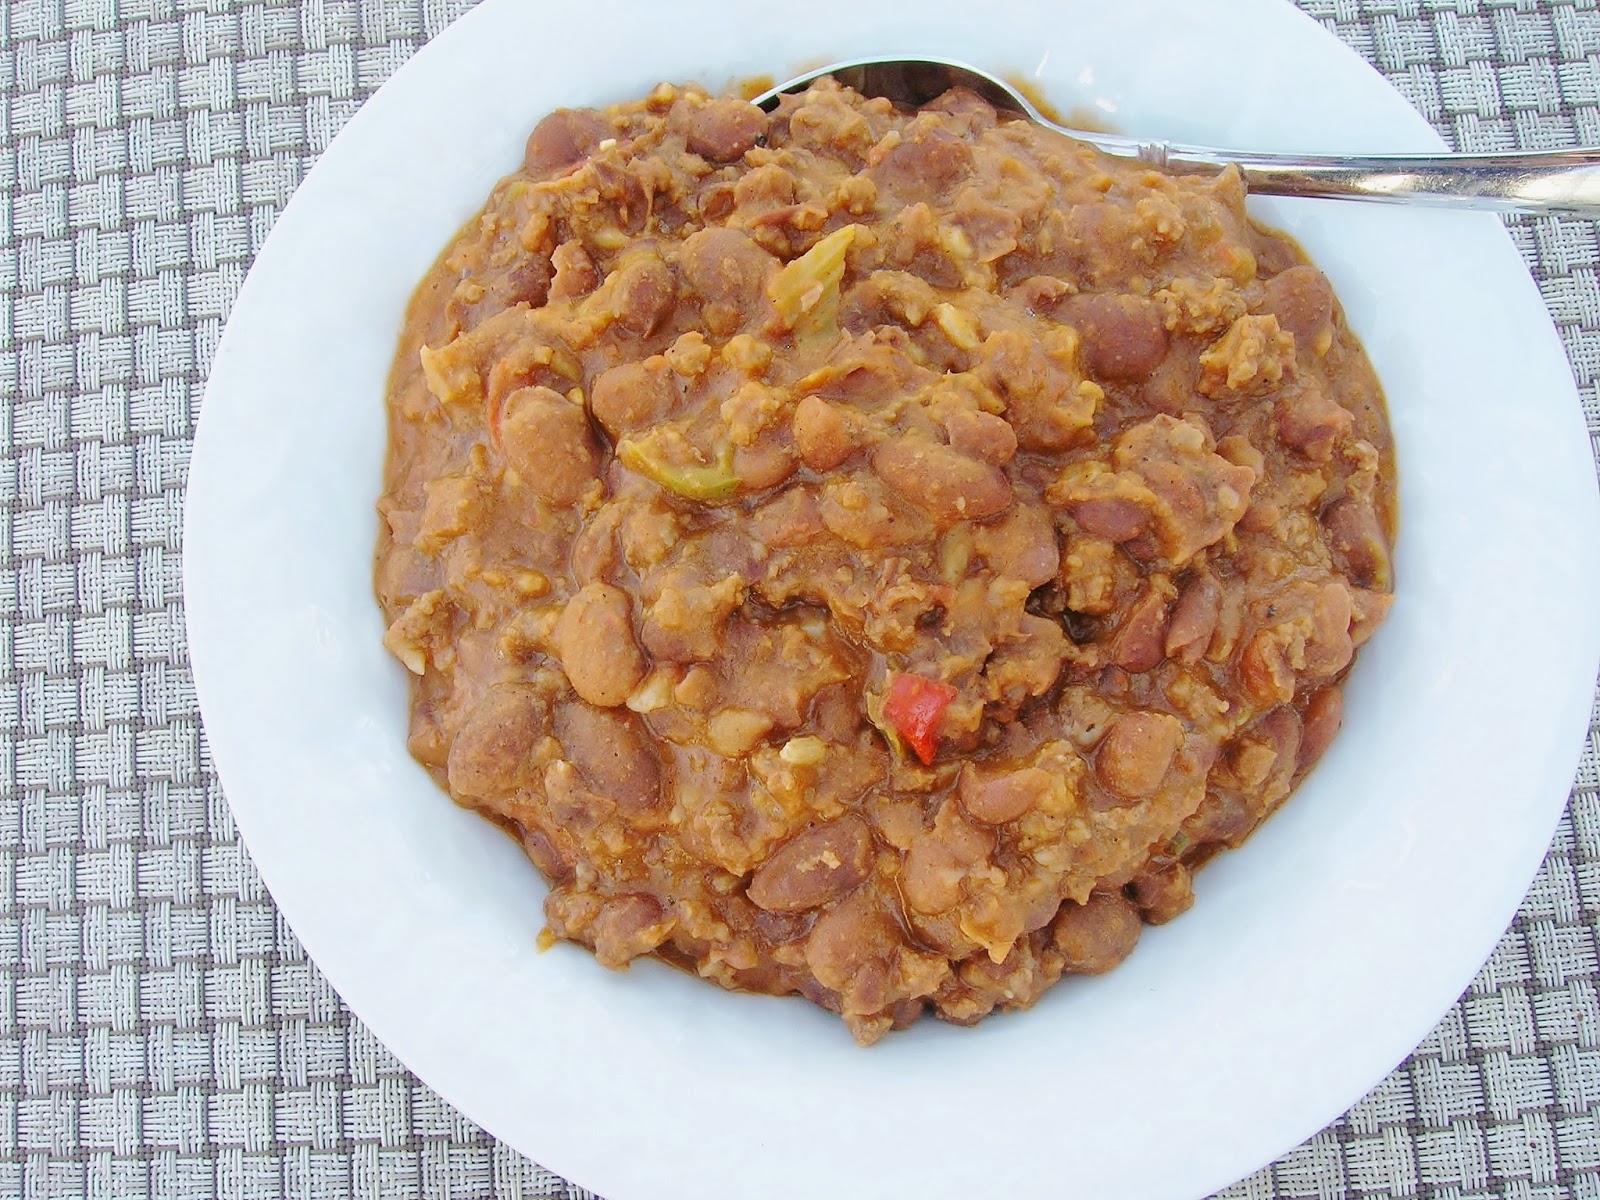 Hearty Pumpkin Chili with Beans, gluten free - Skinny GF Chef healthy ...